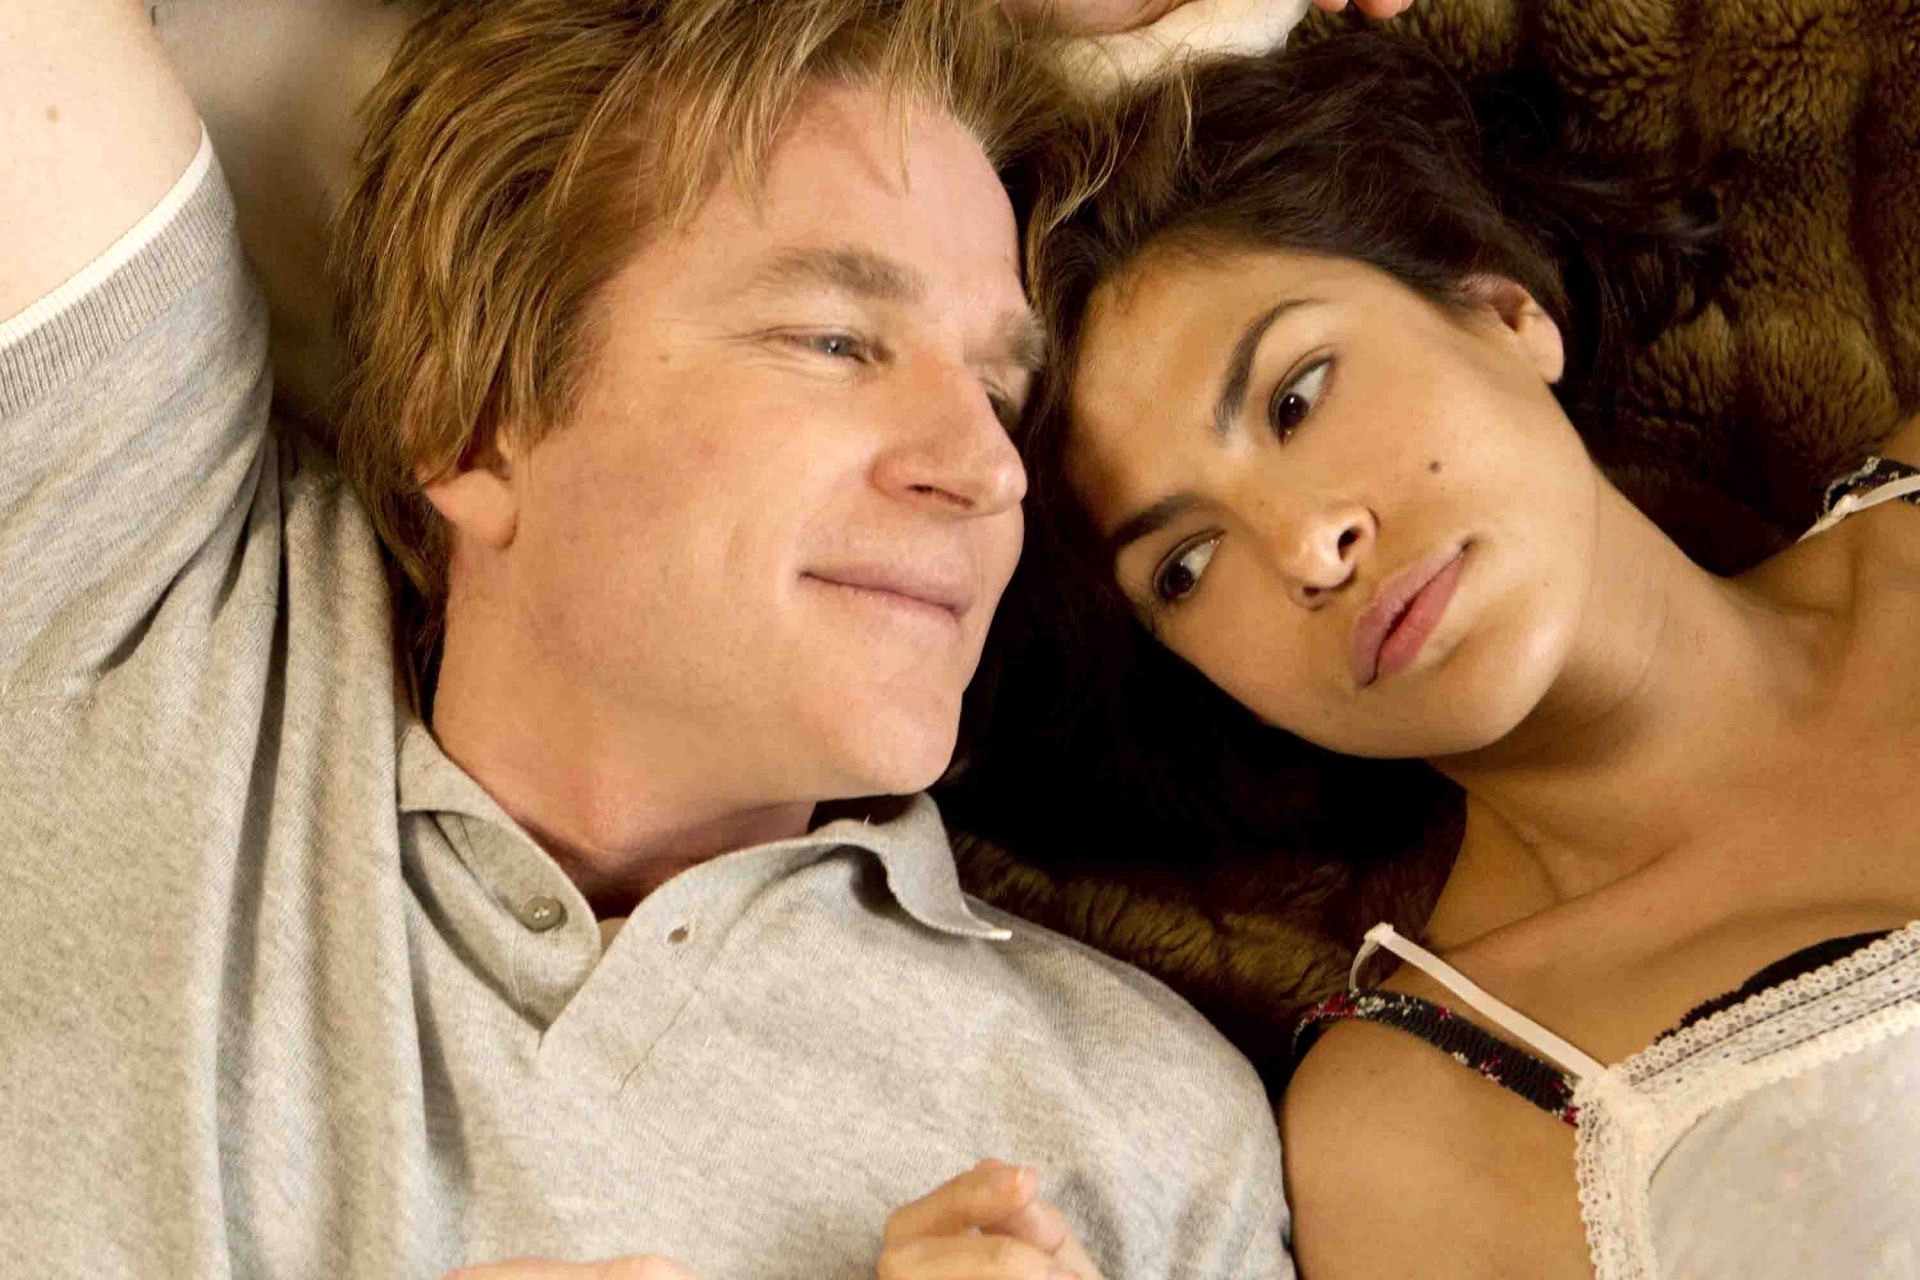 Matthew Modine stars as Dr. Harford and Eva Mendes stars as Grace in Pantelion Films' Girl in Progress (2012). Photo credit by Bob Akester.